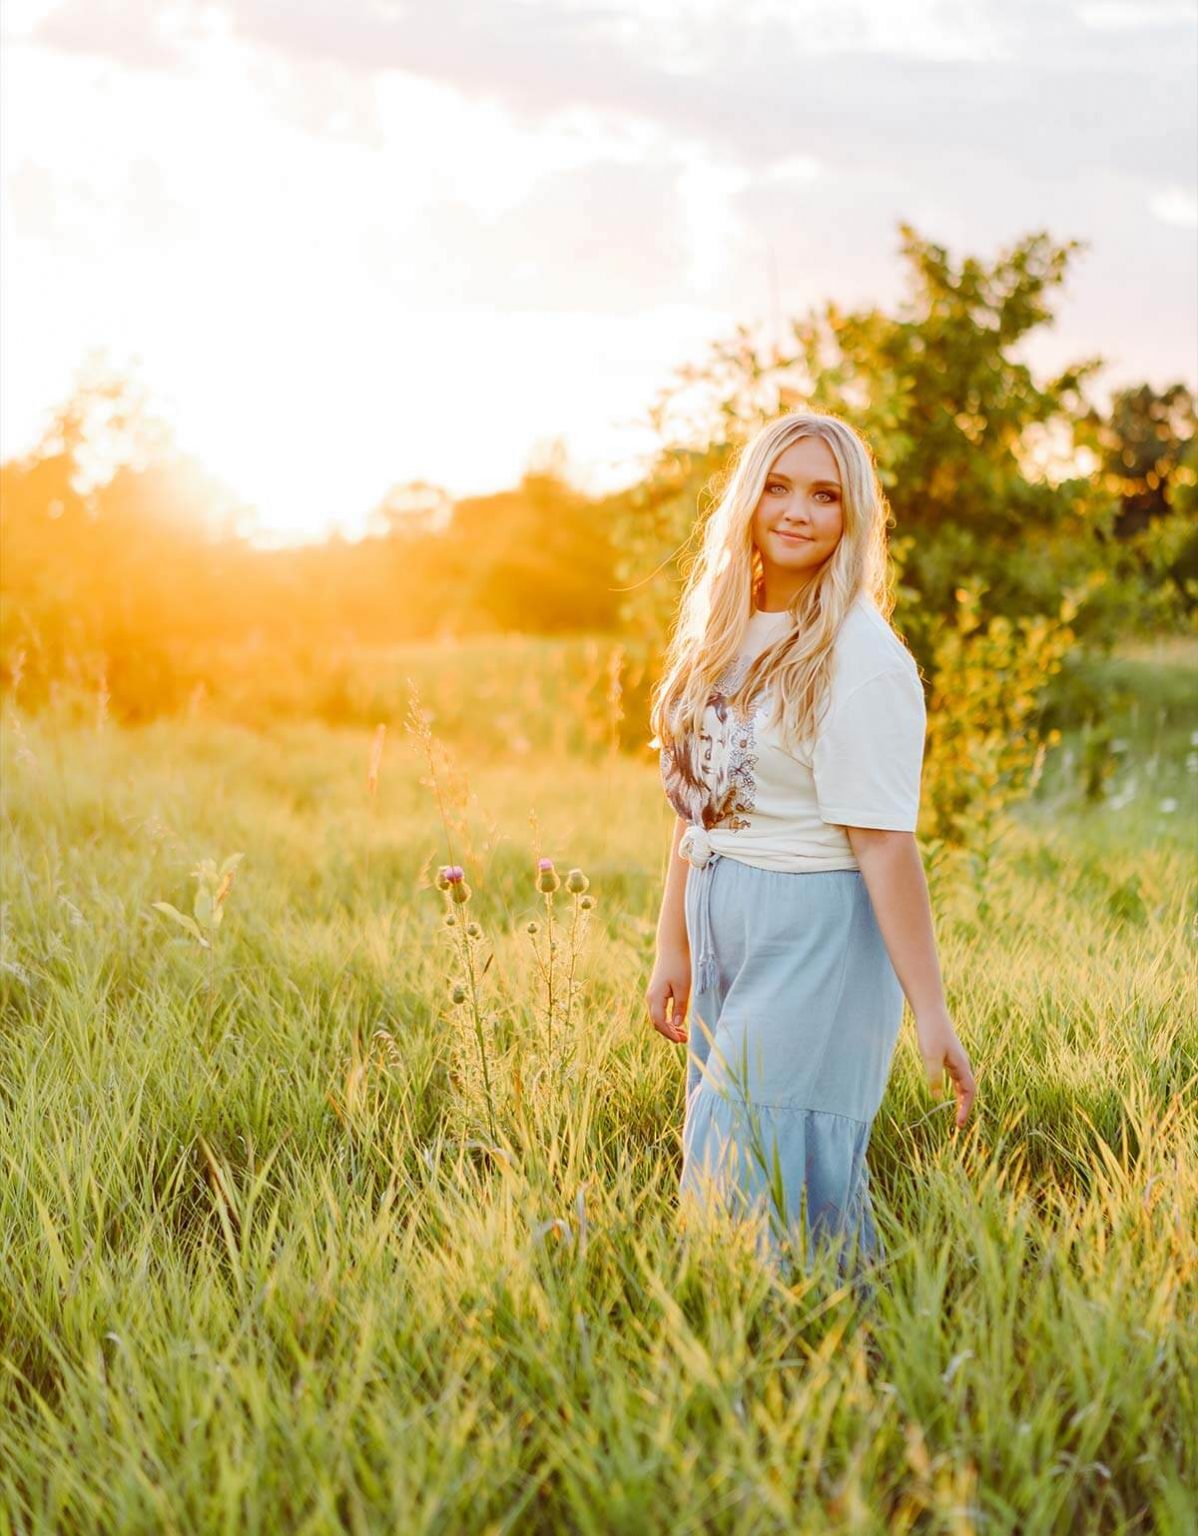 How to Use Natural Light for Modern Senior Portraits